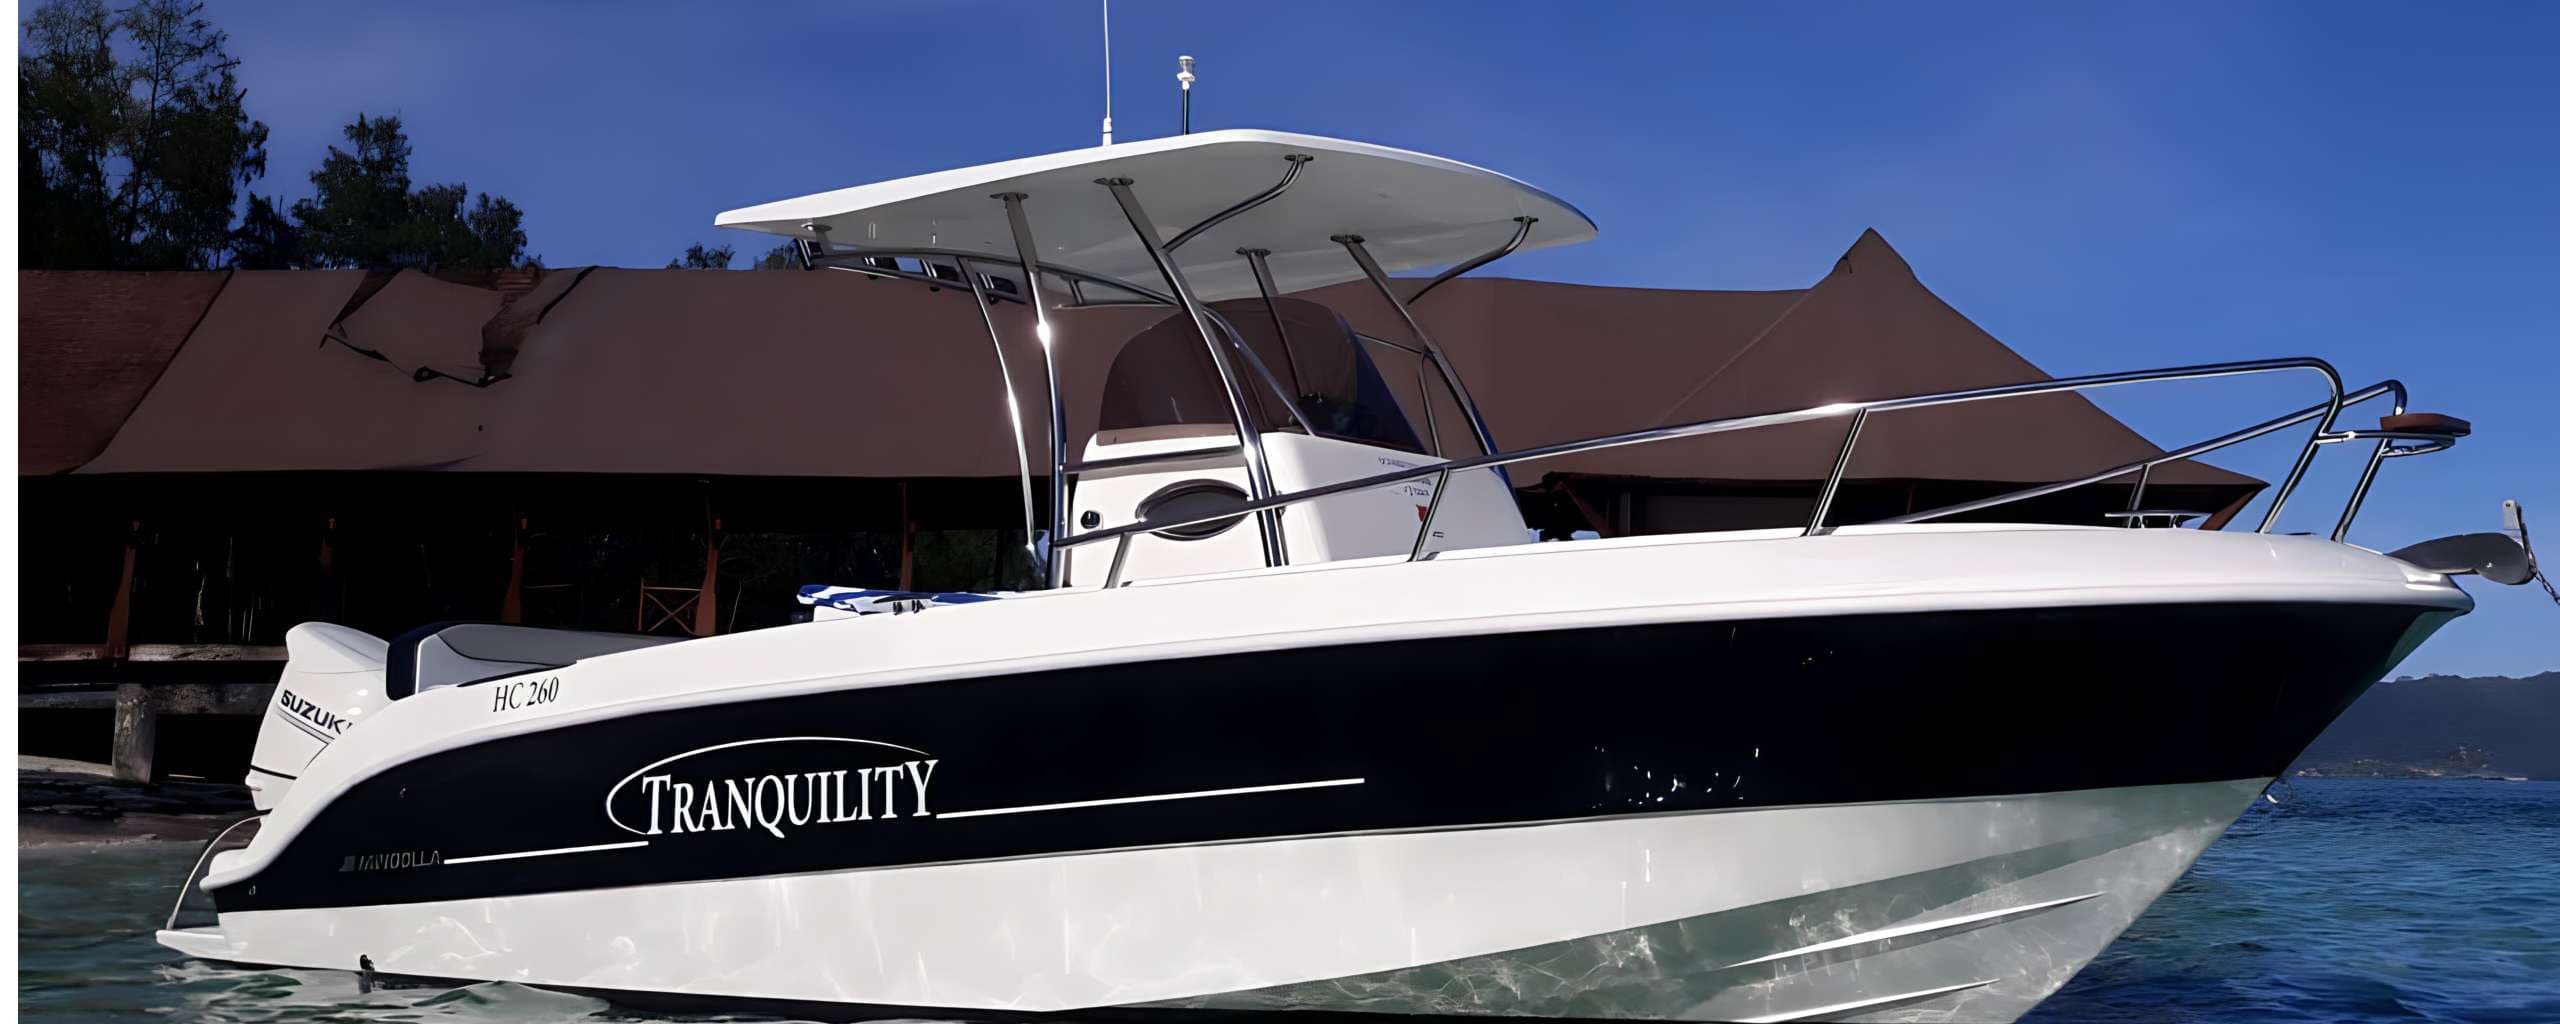 Tranquility Boat Charter